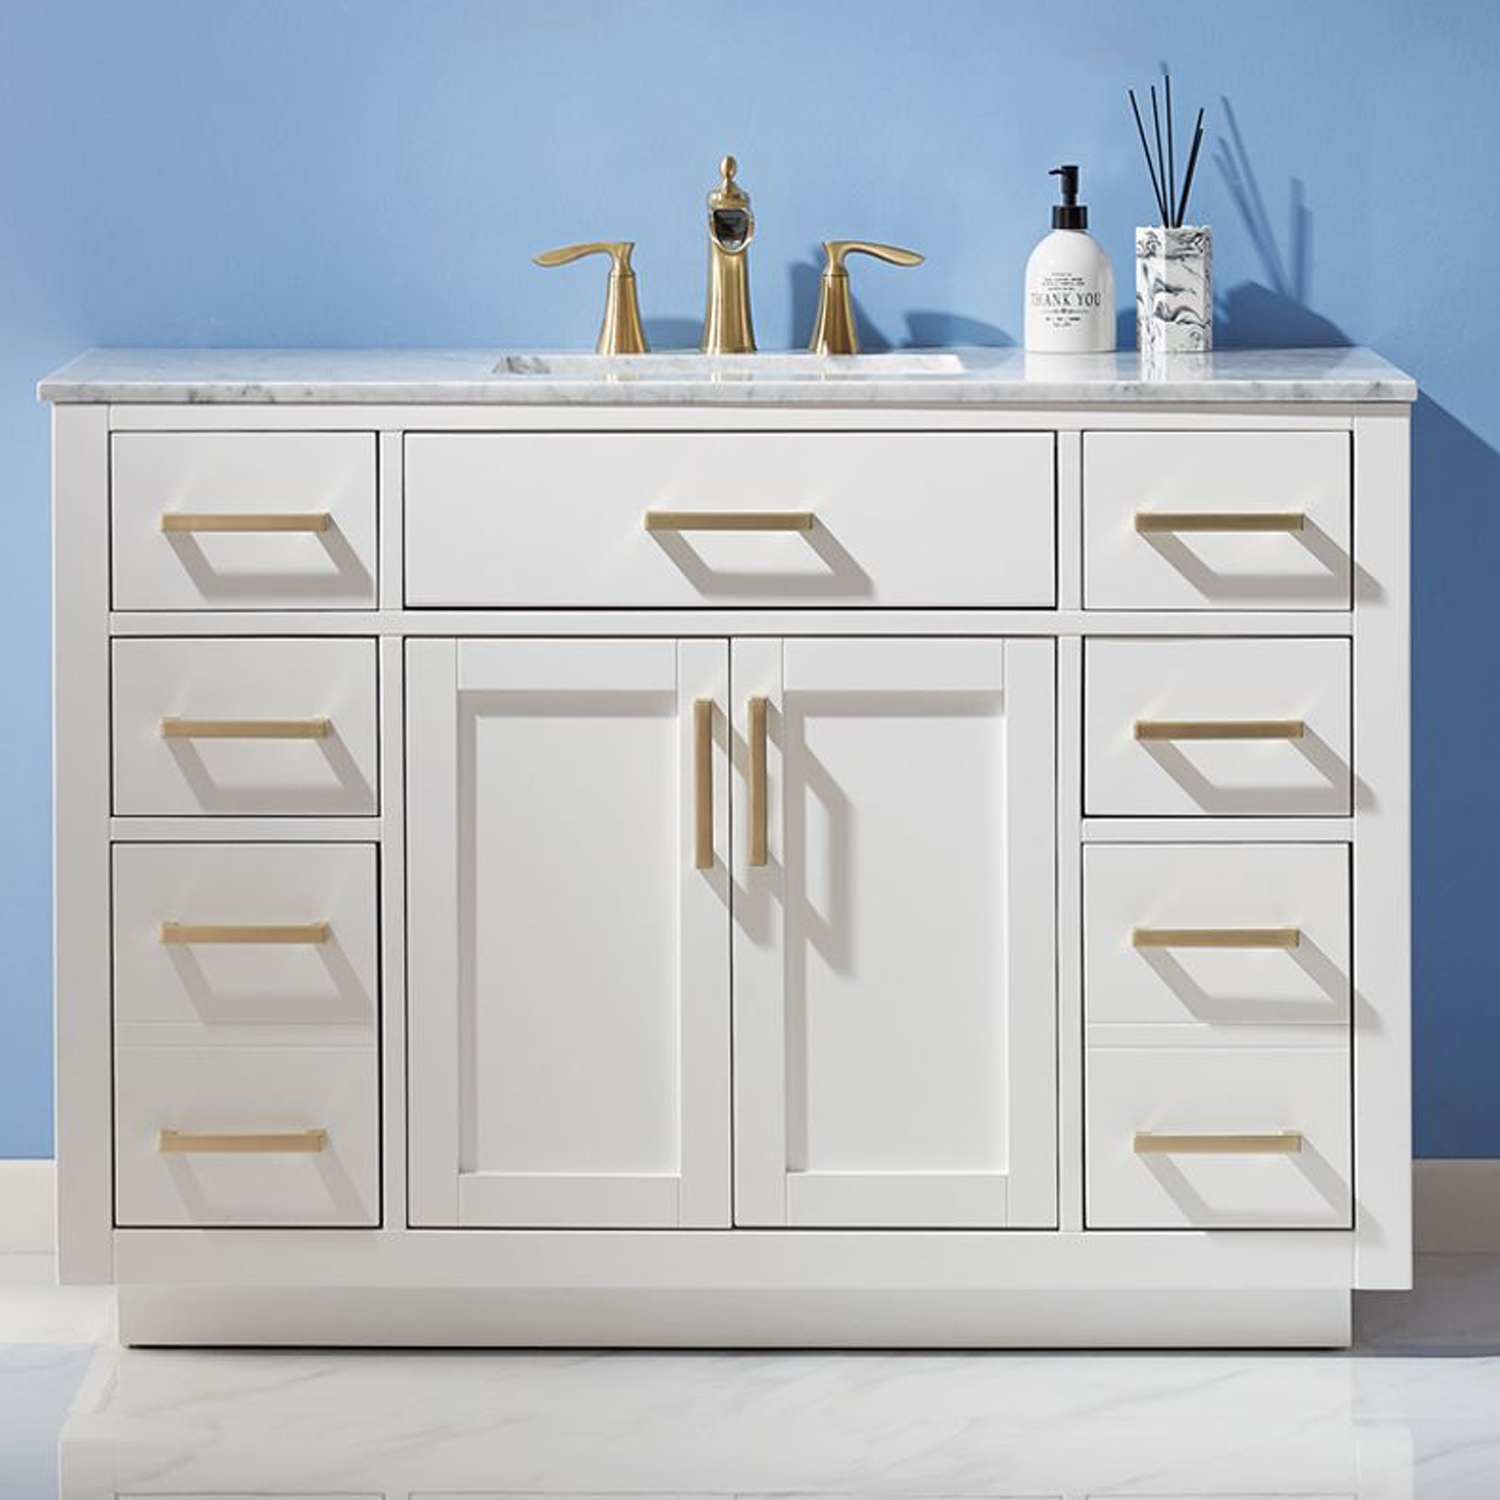 Issac Edwards Collection 48" Single Bathroom Vanity Set in White and Carrara White Marble Countertop